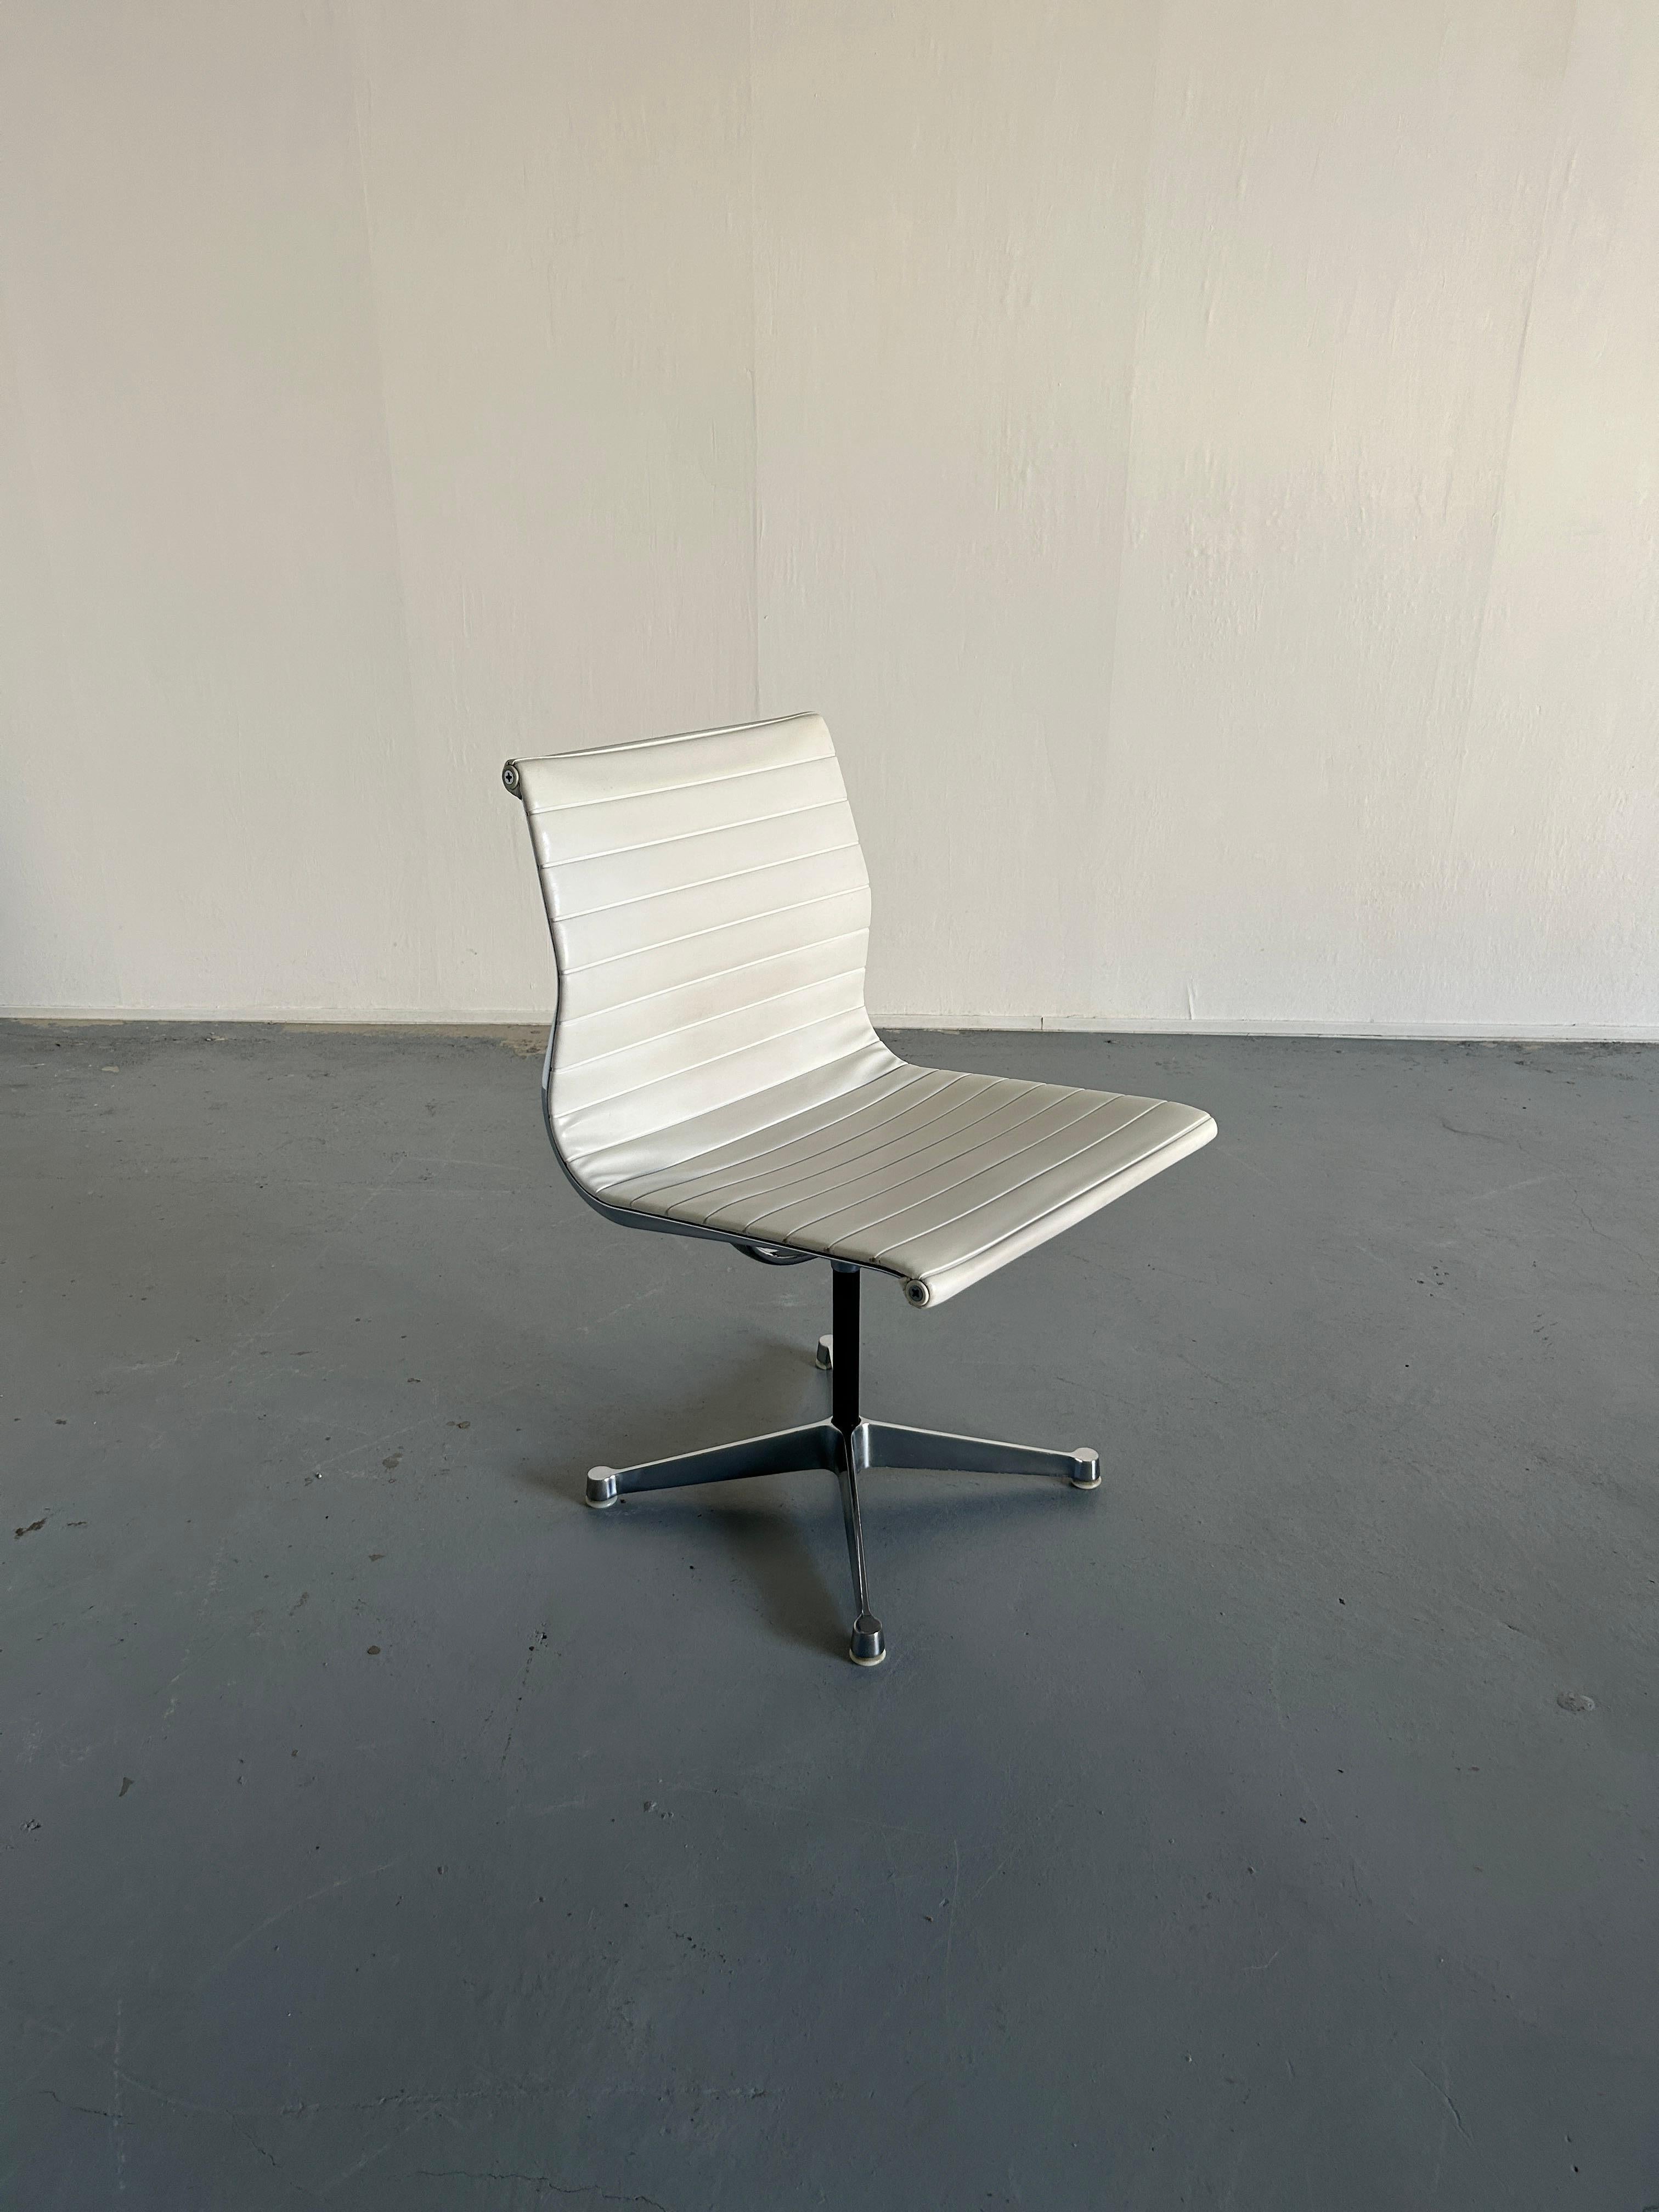 1 of 5 Original Vintage 'EA 107' Aluminium Desk Chairs by Charles & Ray Eames For Sale 1